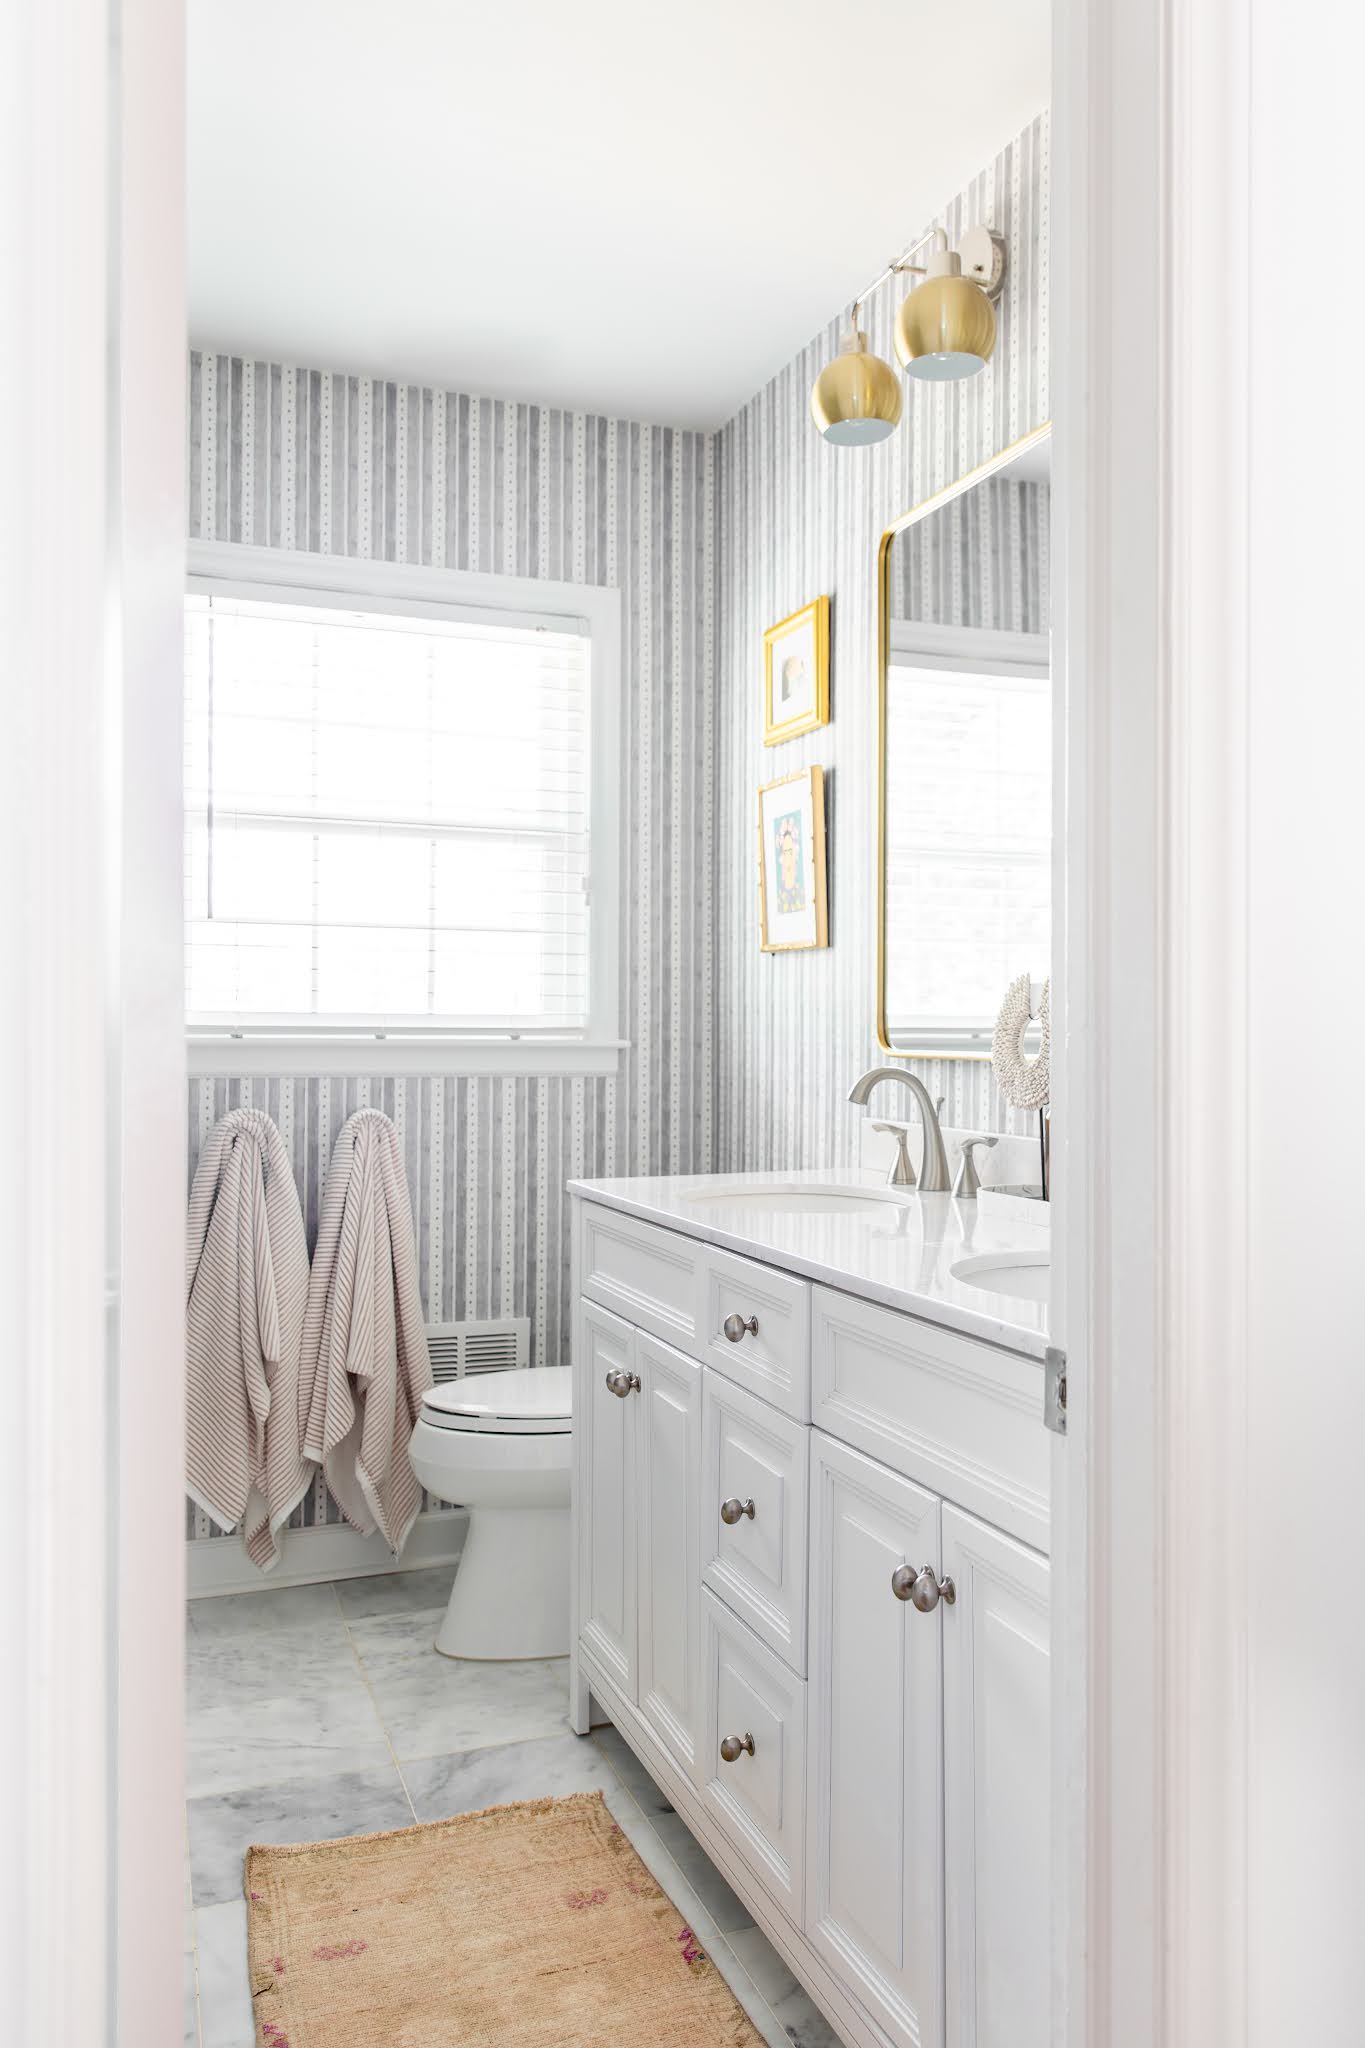 A Fun, Playful Kid's Bathroom Renovation Before and After Reveal